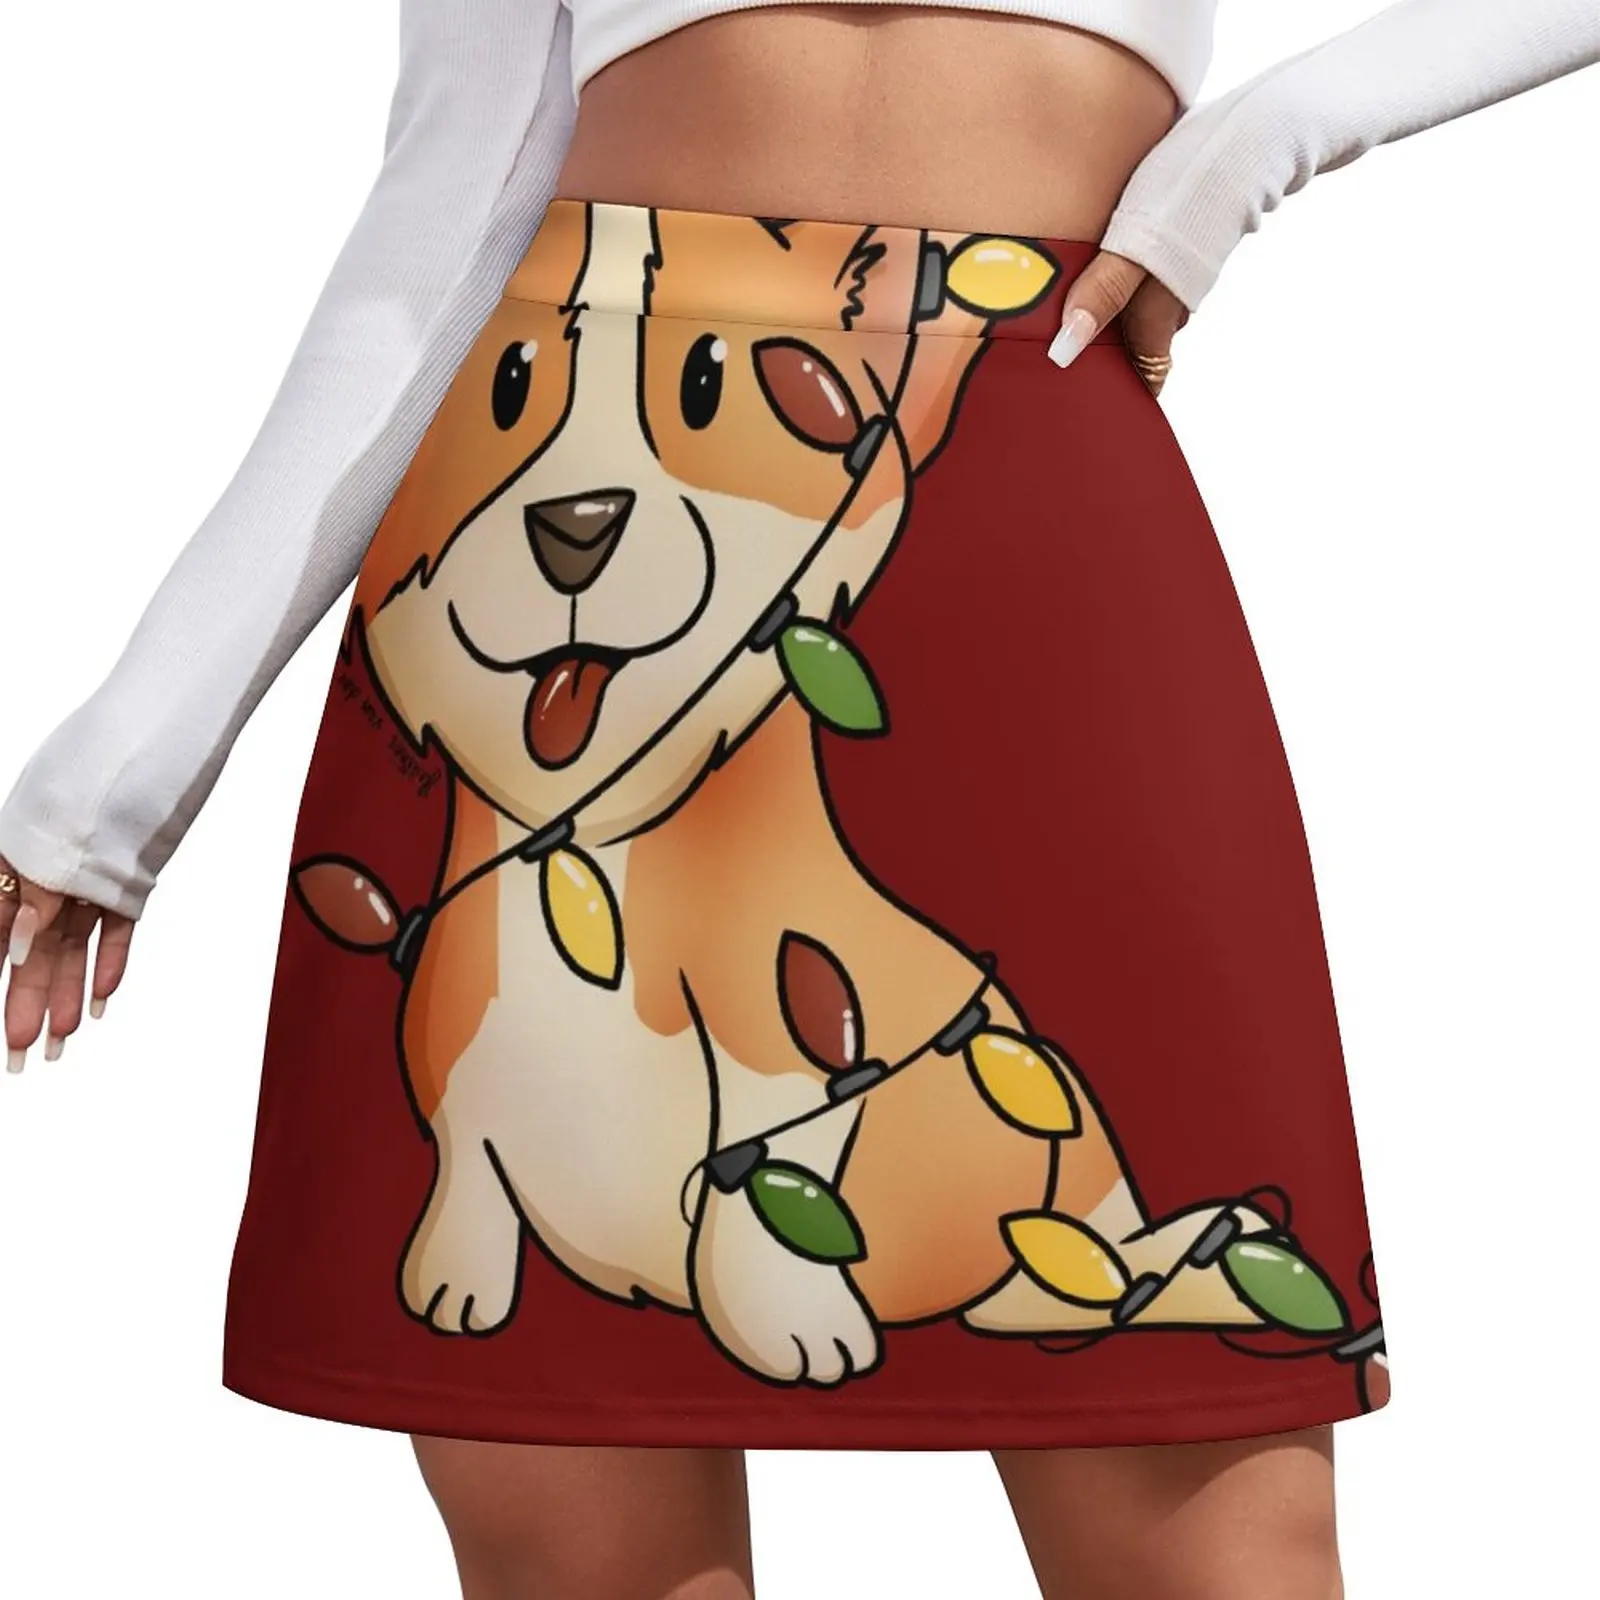 Our Little Cute Corgi Tangled in Christmas Lights On a Cheery Red Mini Skirt womens skirts Women clothing christmas lights led fairy lights